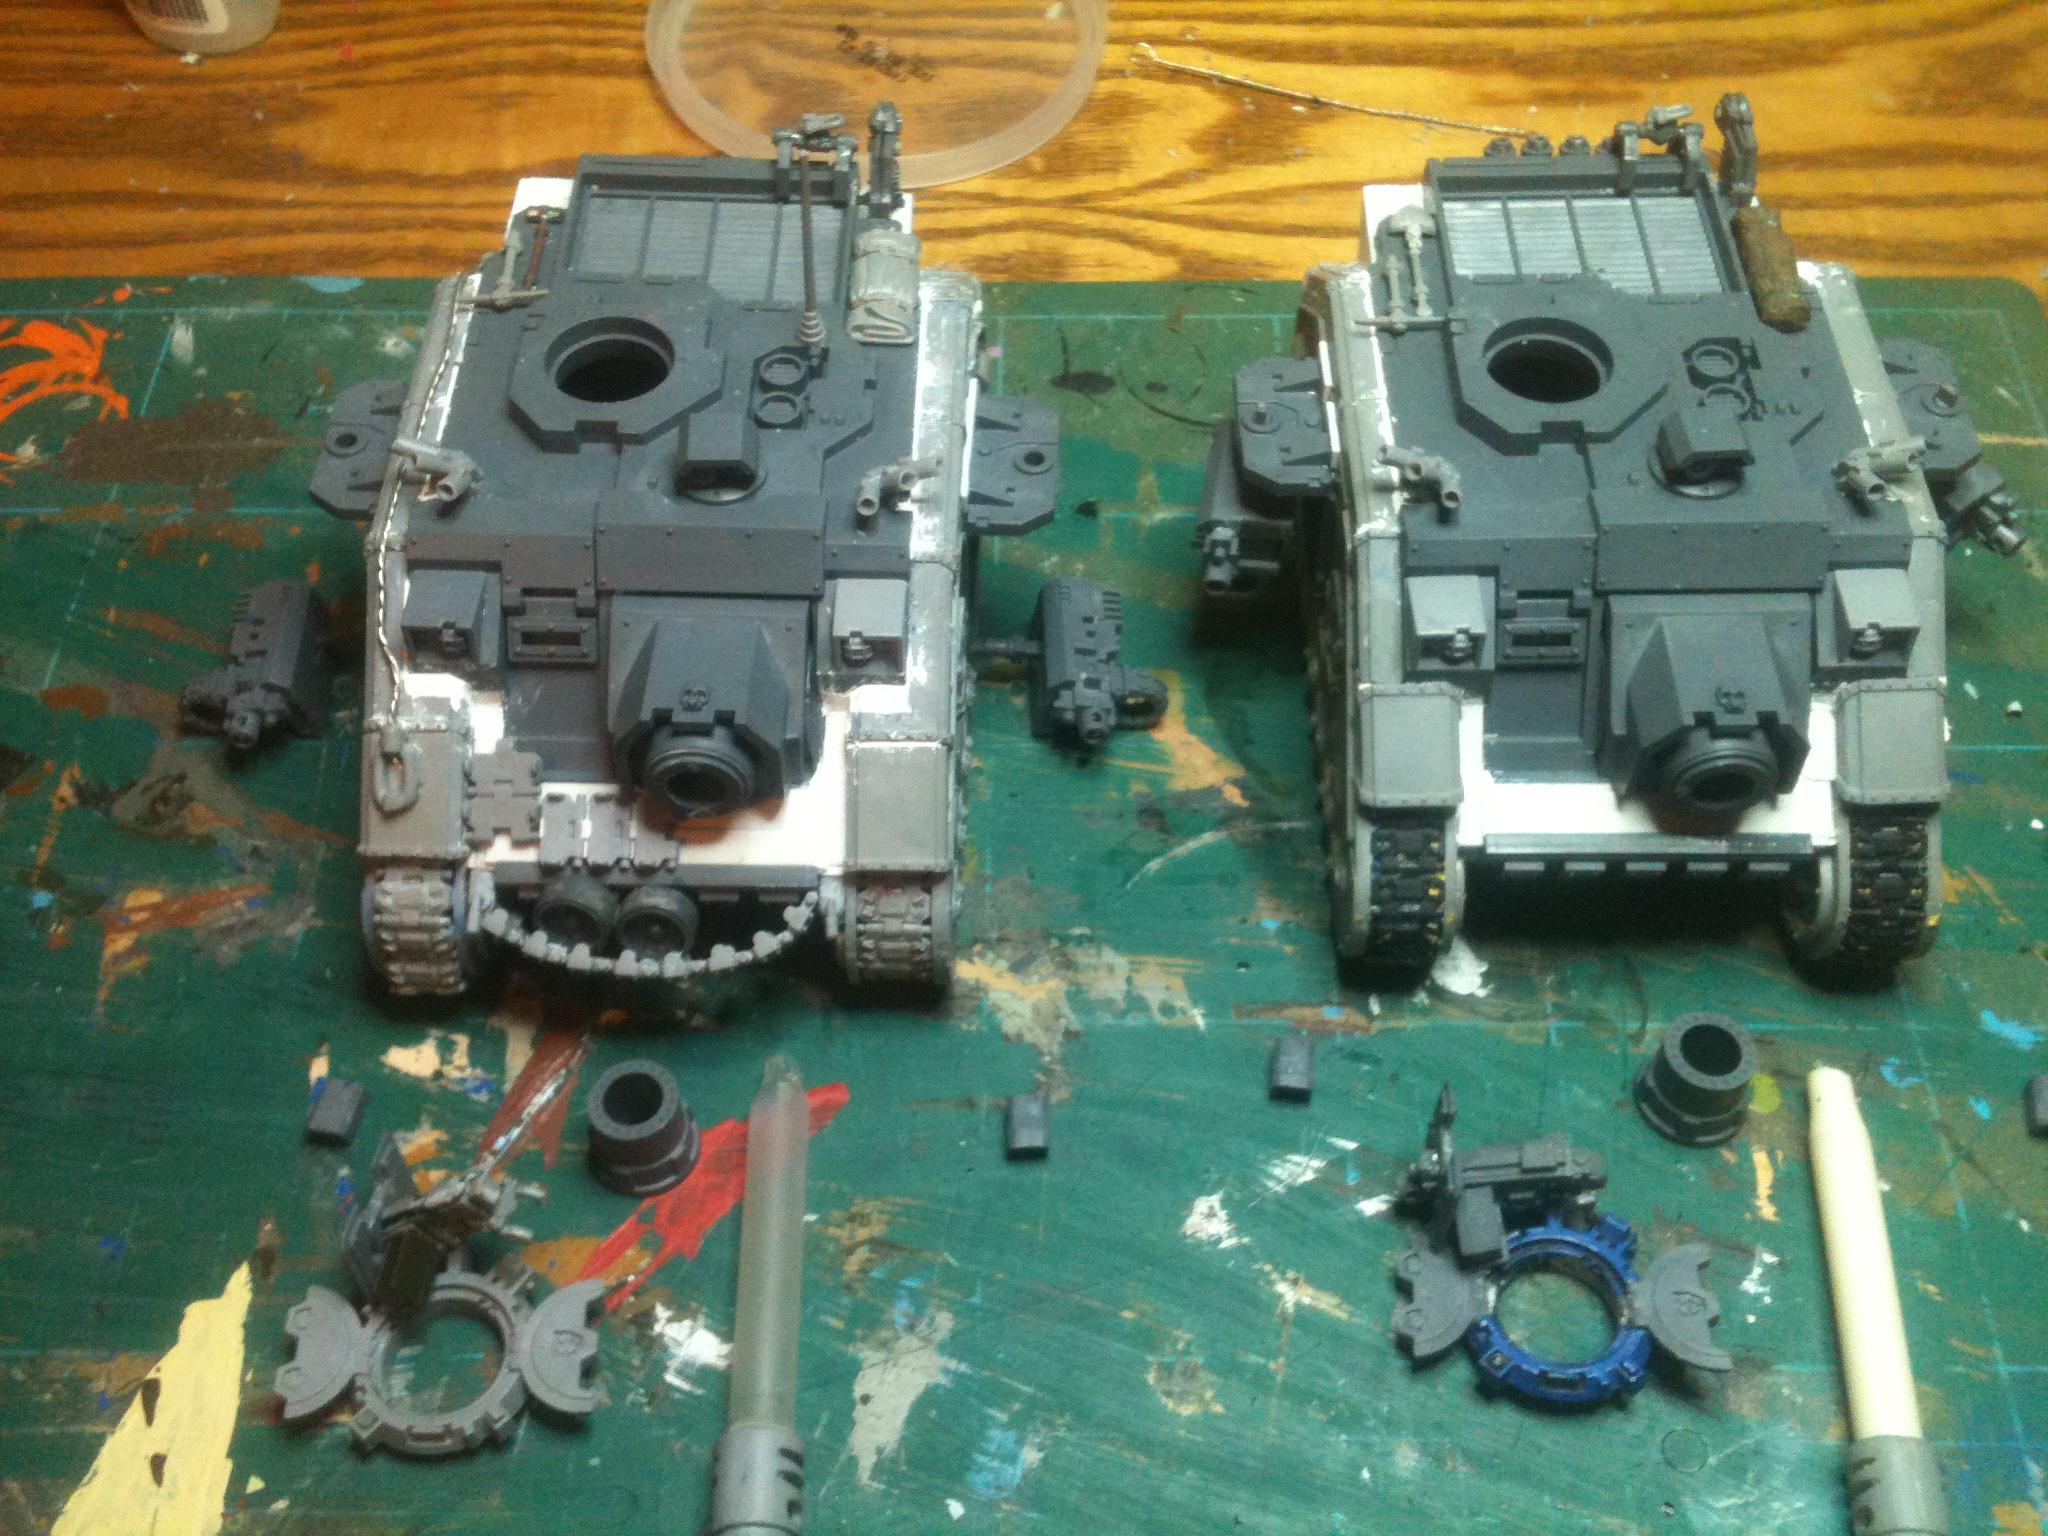 Pretty much the finished articles minus crew , ready for paint